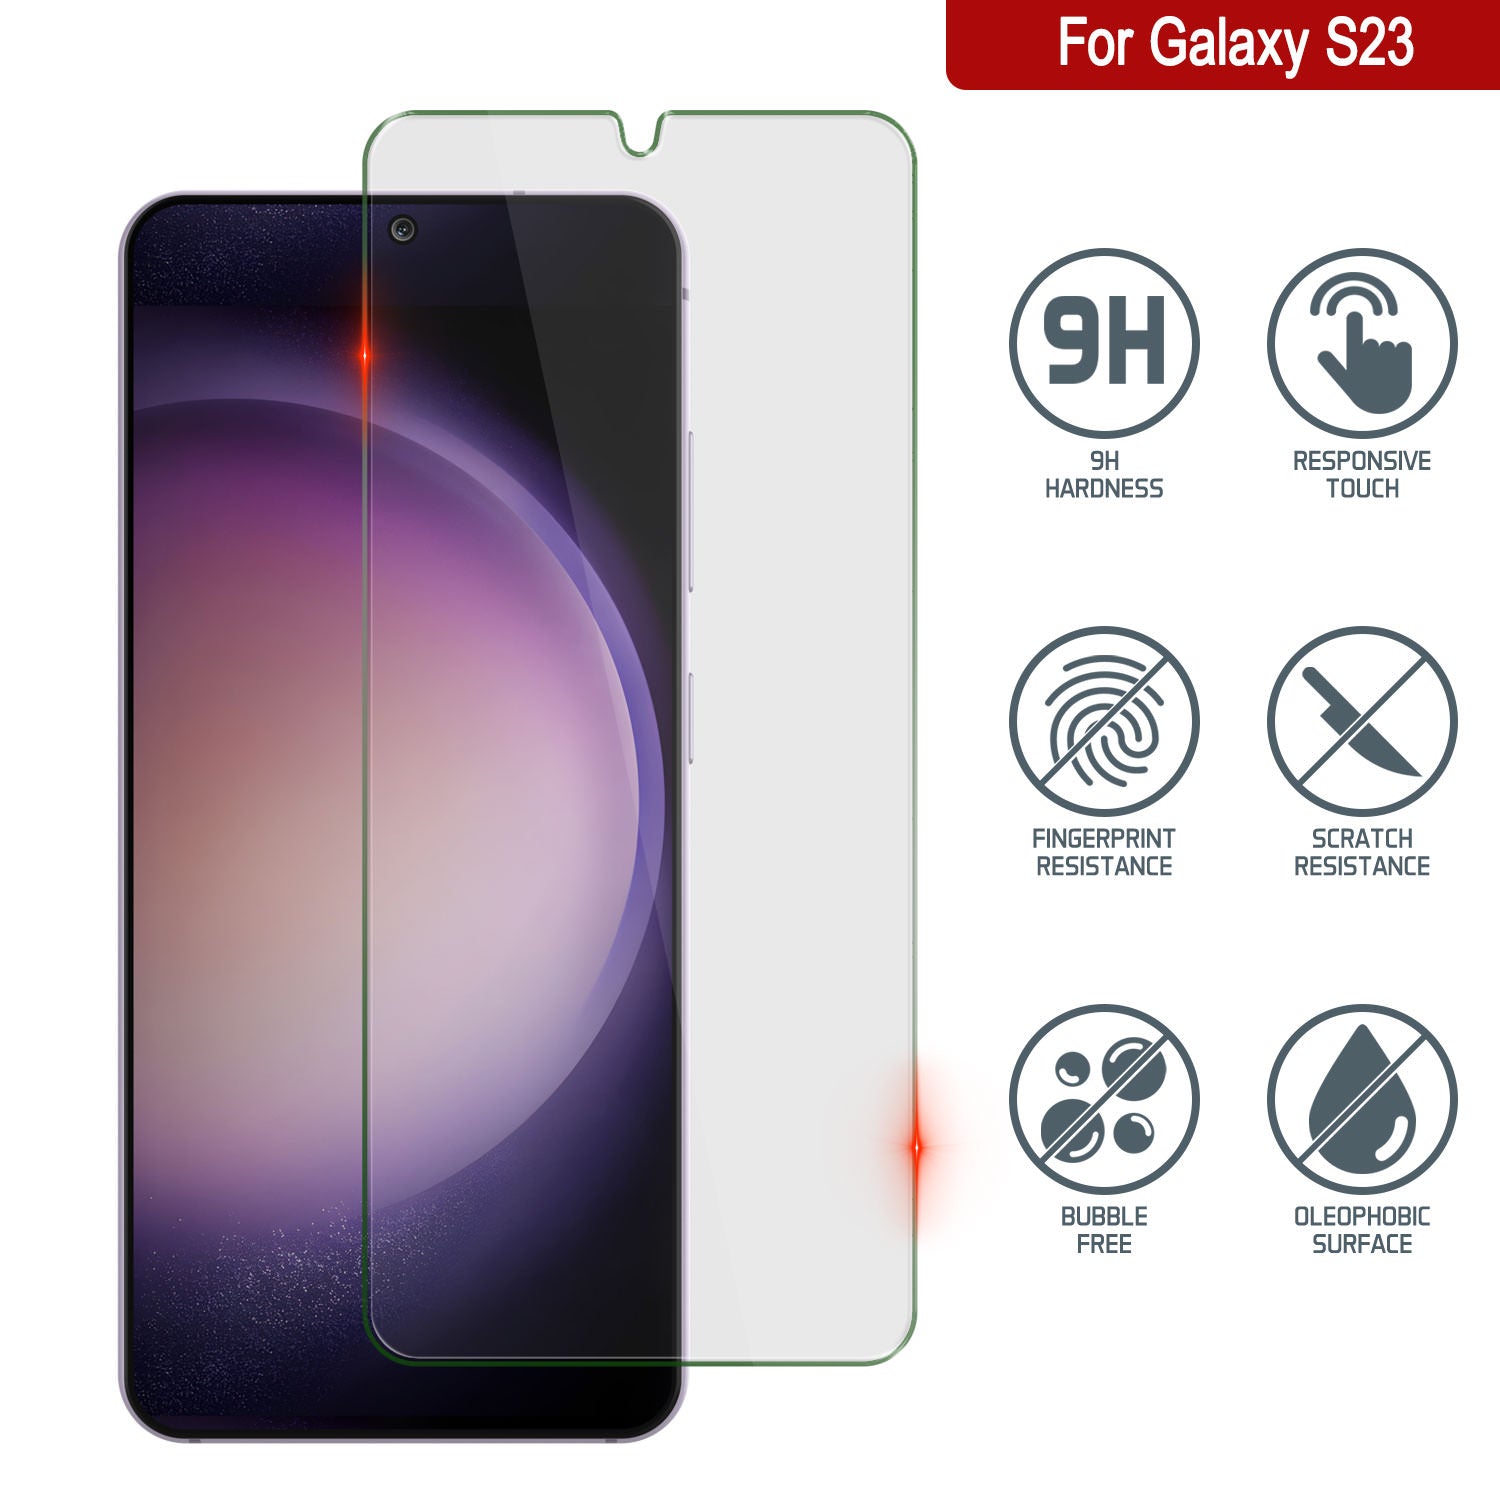 Galaxy S23  Clear Punkcase Glass SHIELD Tempered Glass Screen Protector 0.33mm Thick 9H Glass